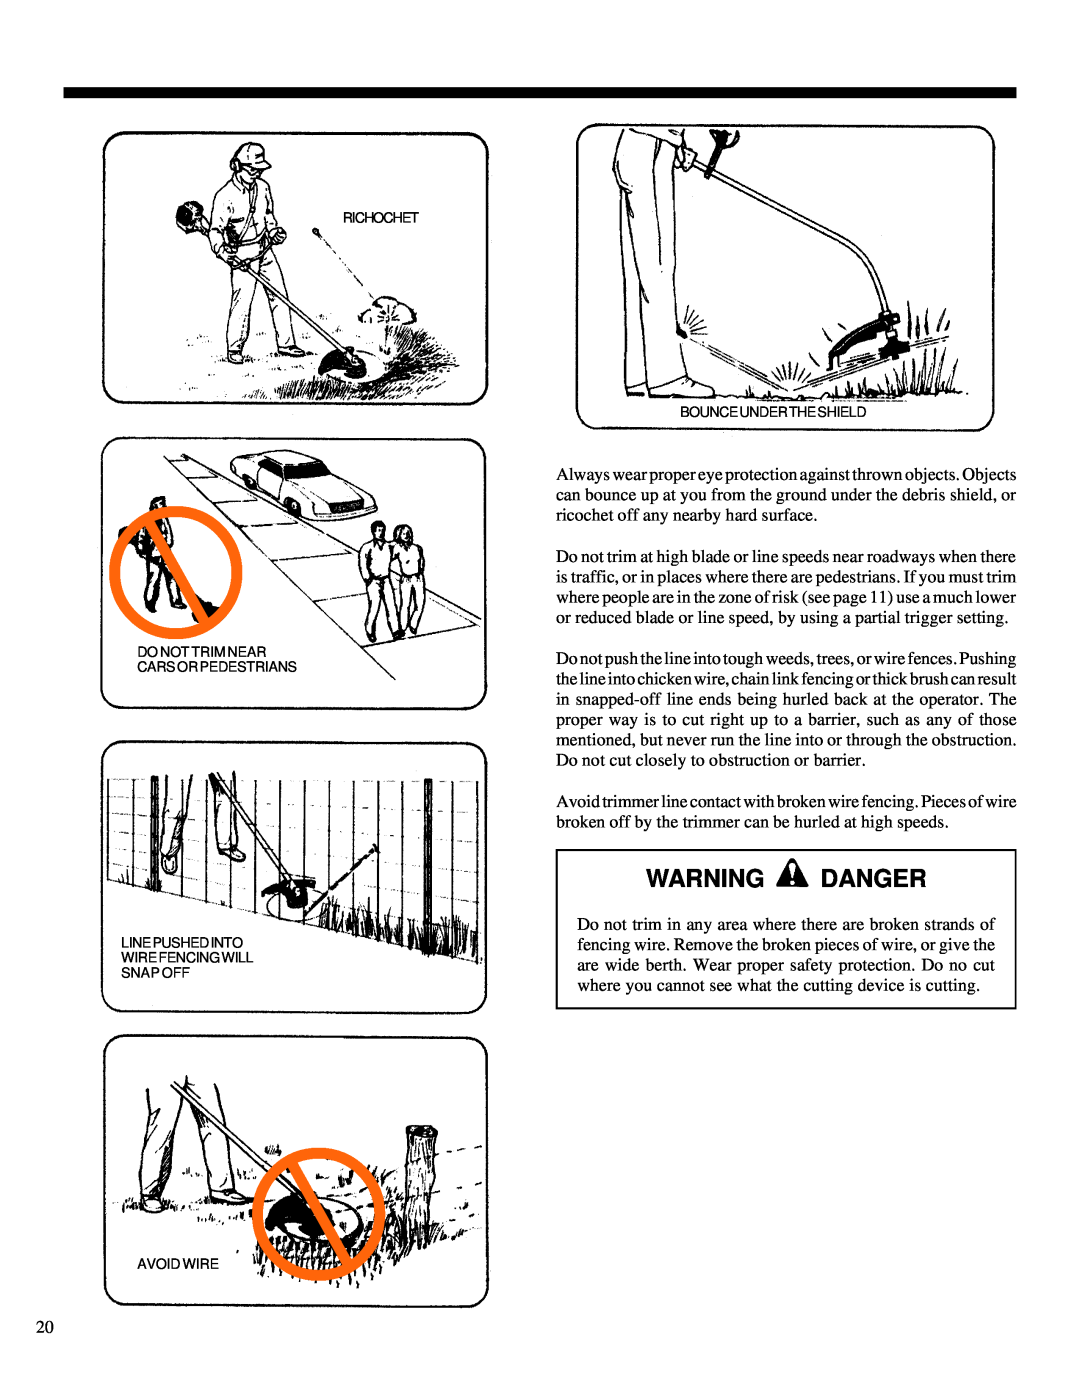 Echo GRASS/WEED TRIMMER BRUSHCUTTER and CLEARING SAW manual Warning Danger, Wire Fencing Will Snap Off Avoid Wire 